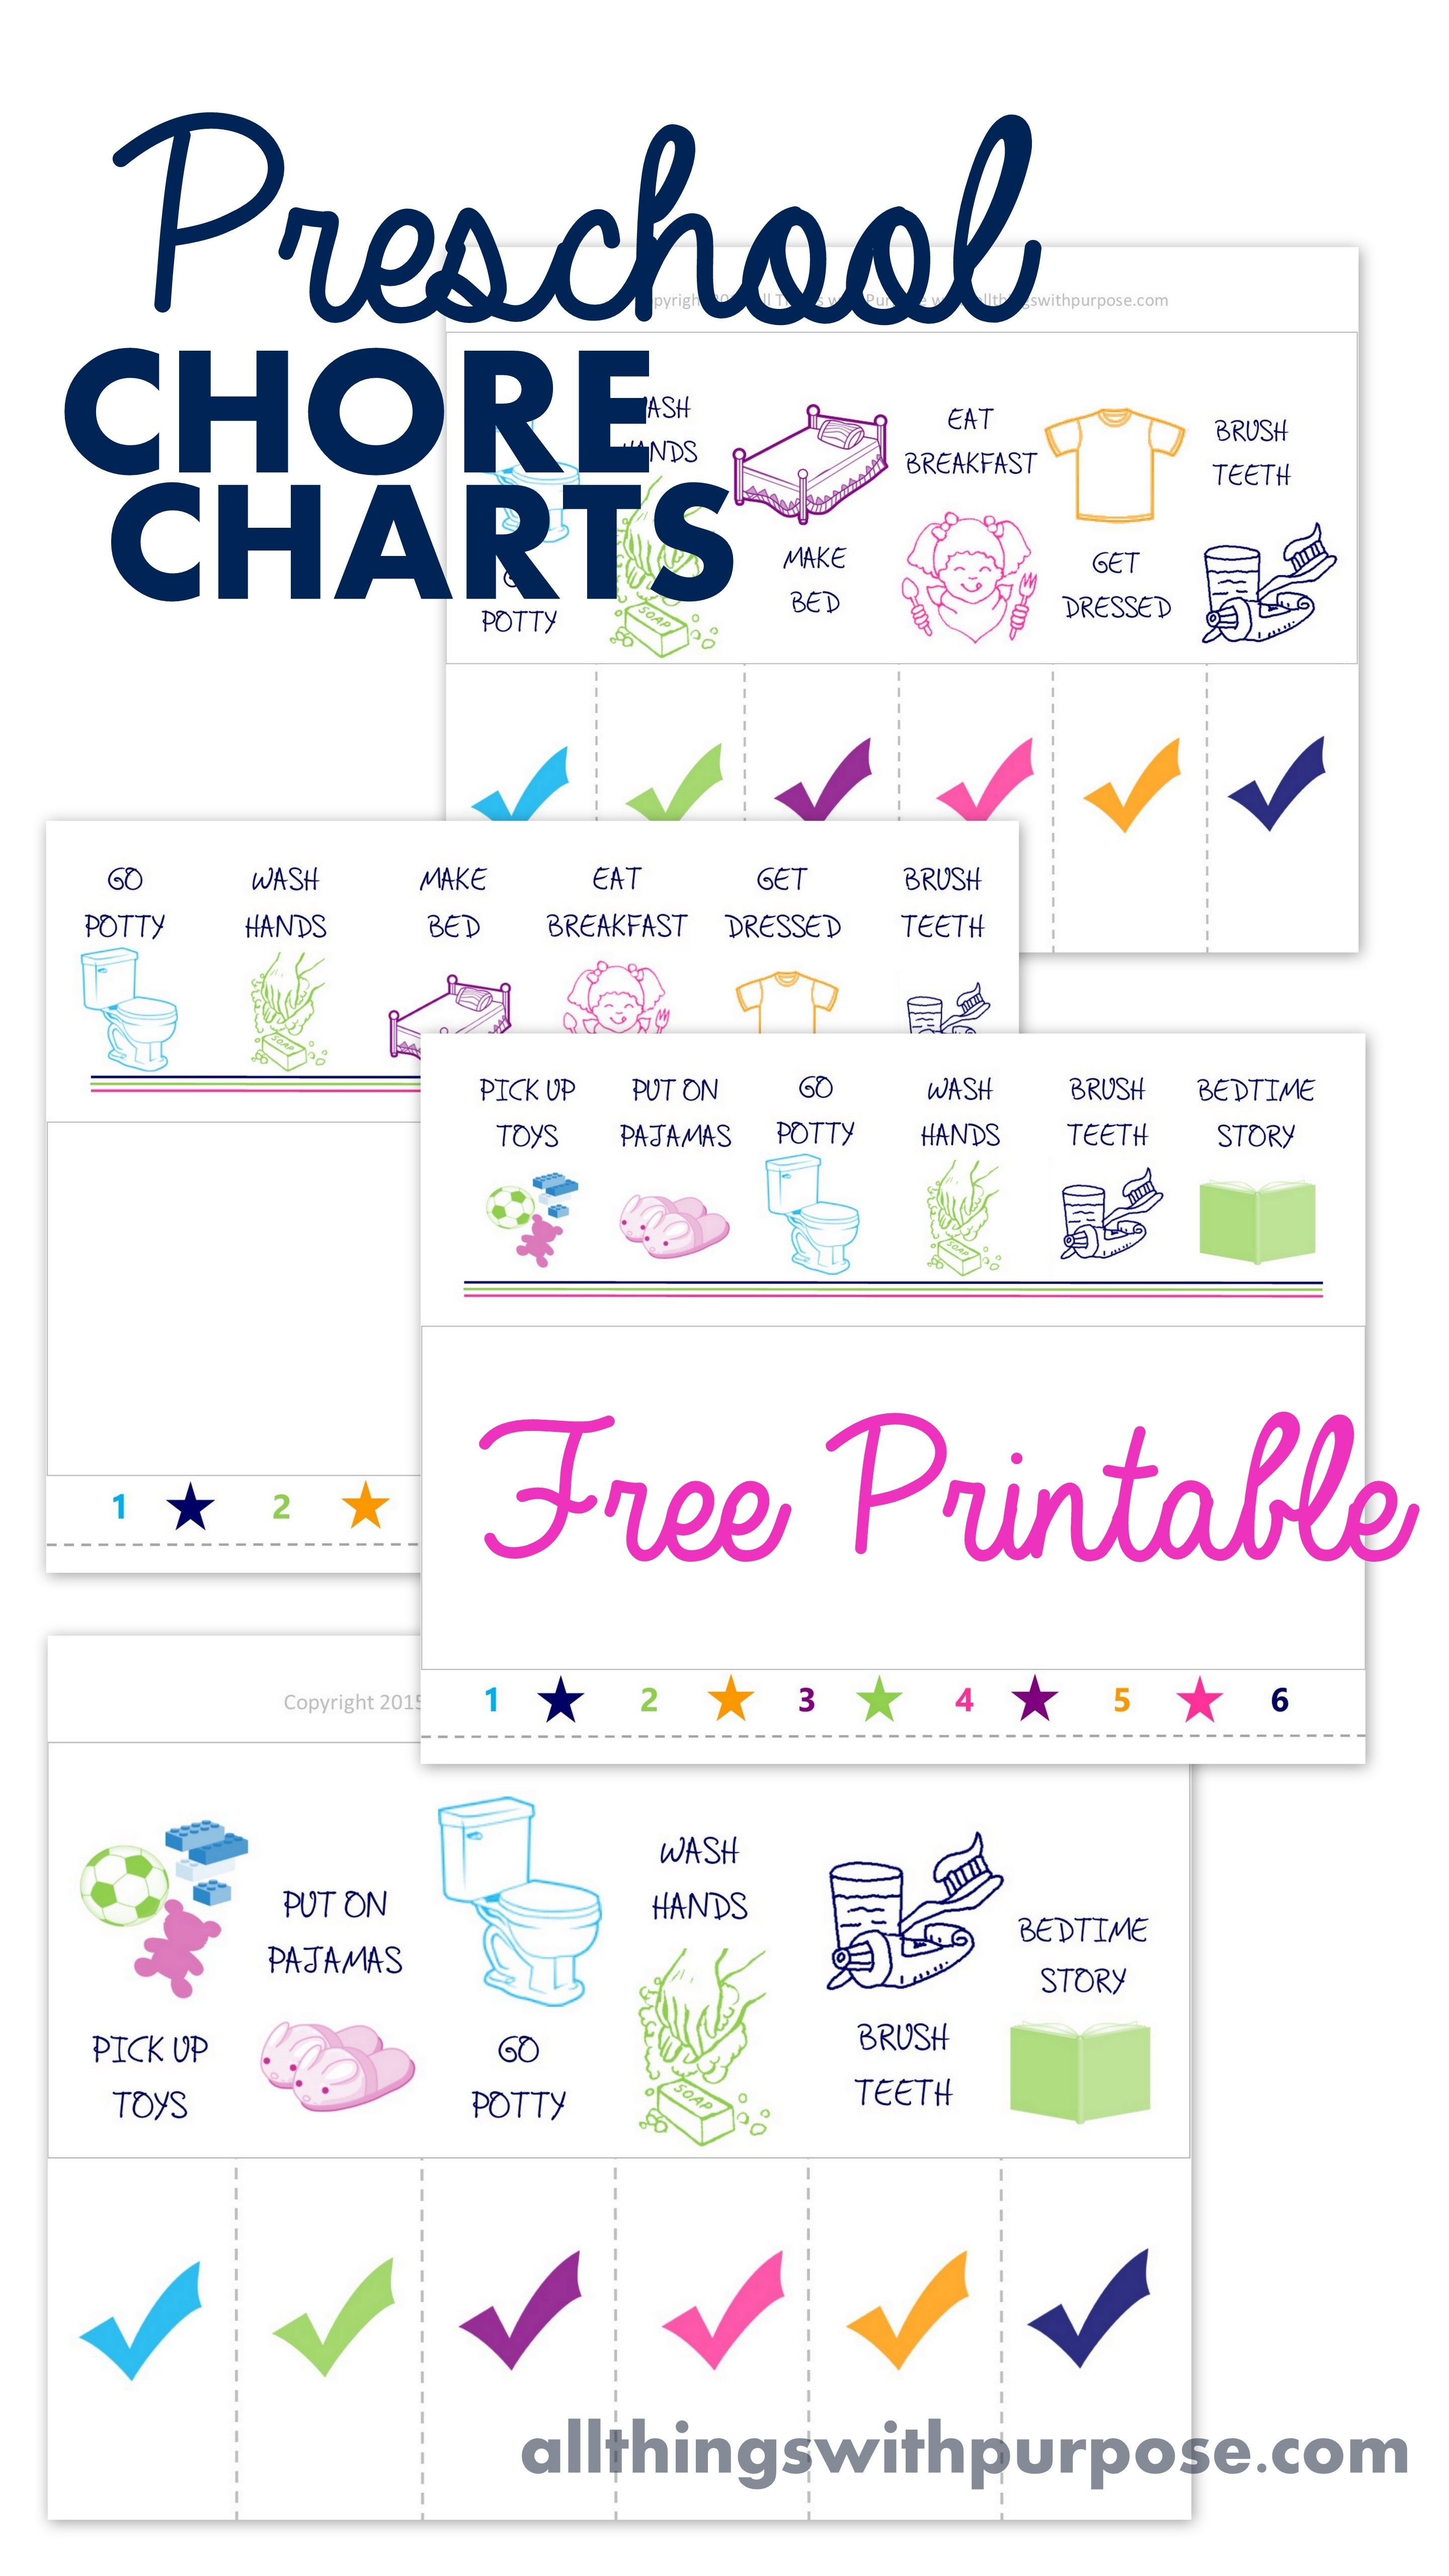 Free Printable Preschool Chore Charts | Kid Stuff | Chore Chart Kids - Free Printable Chore Charts For Kids With Pictures